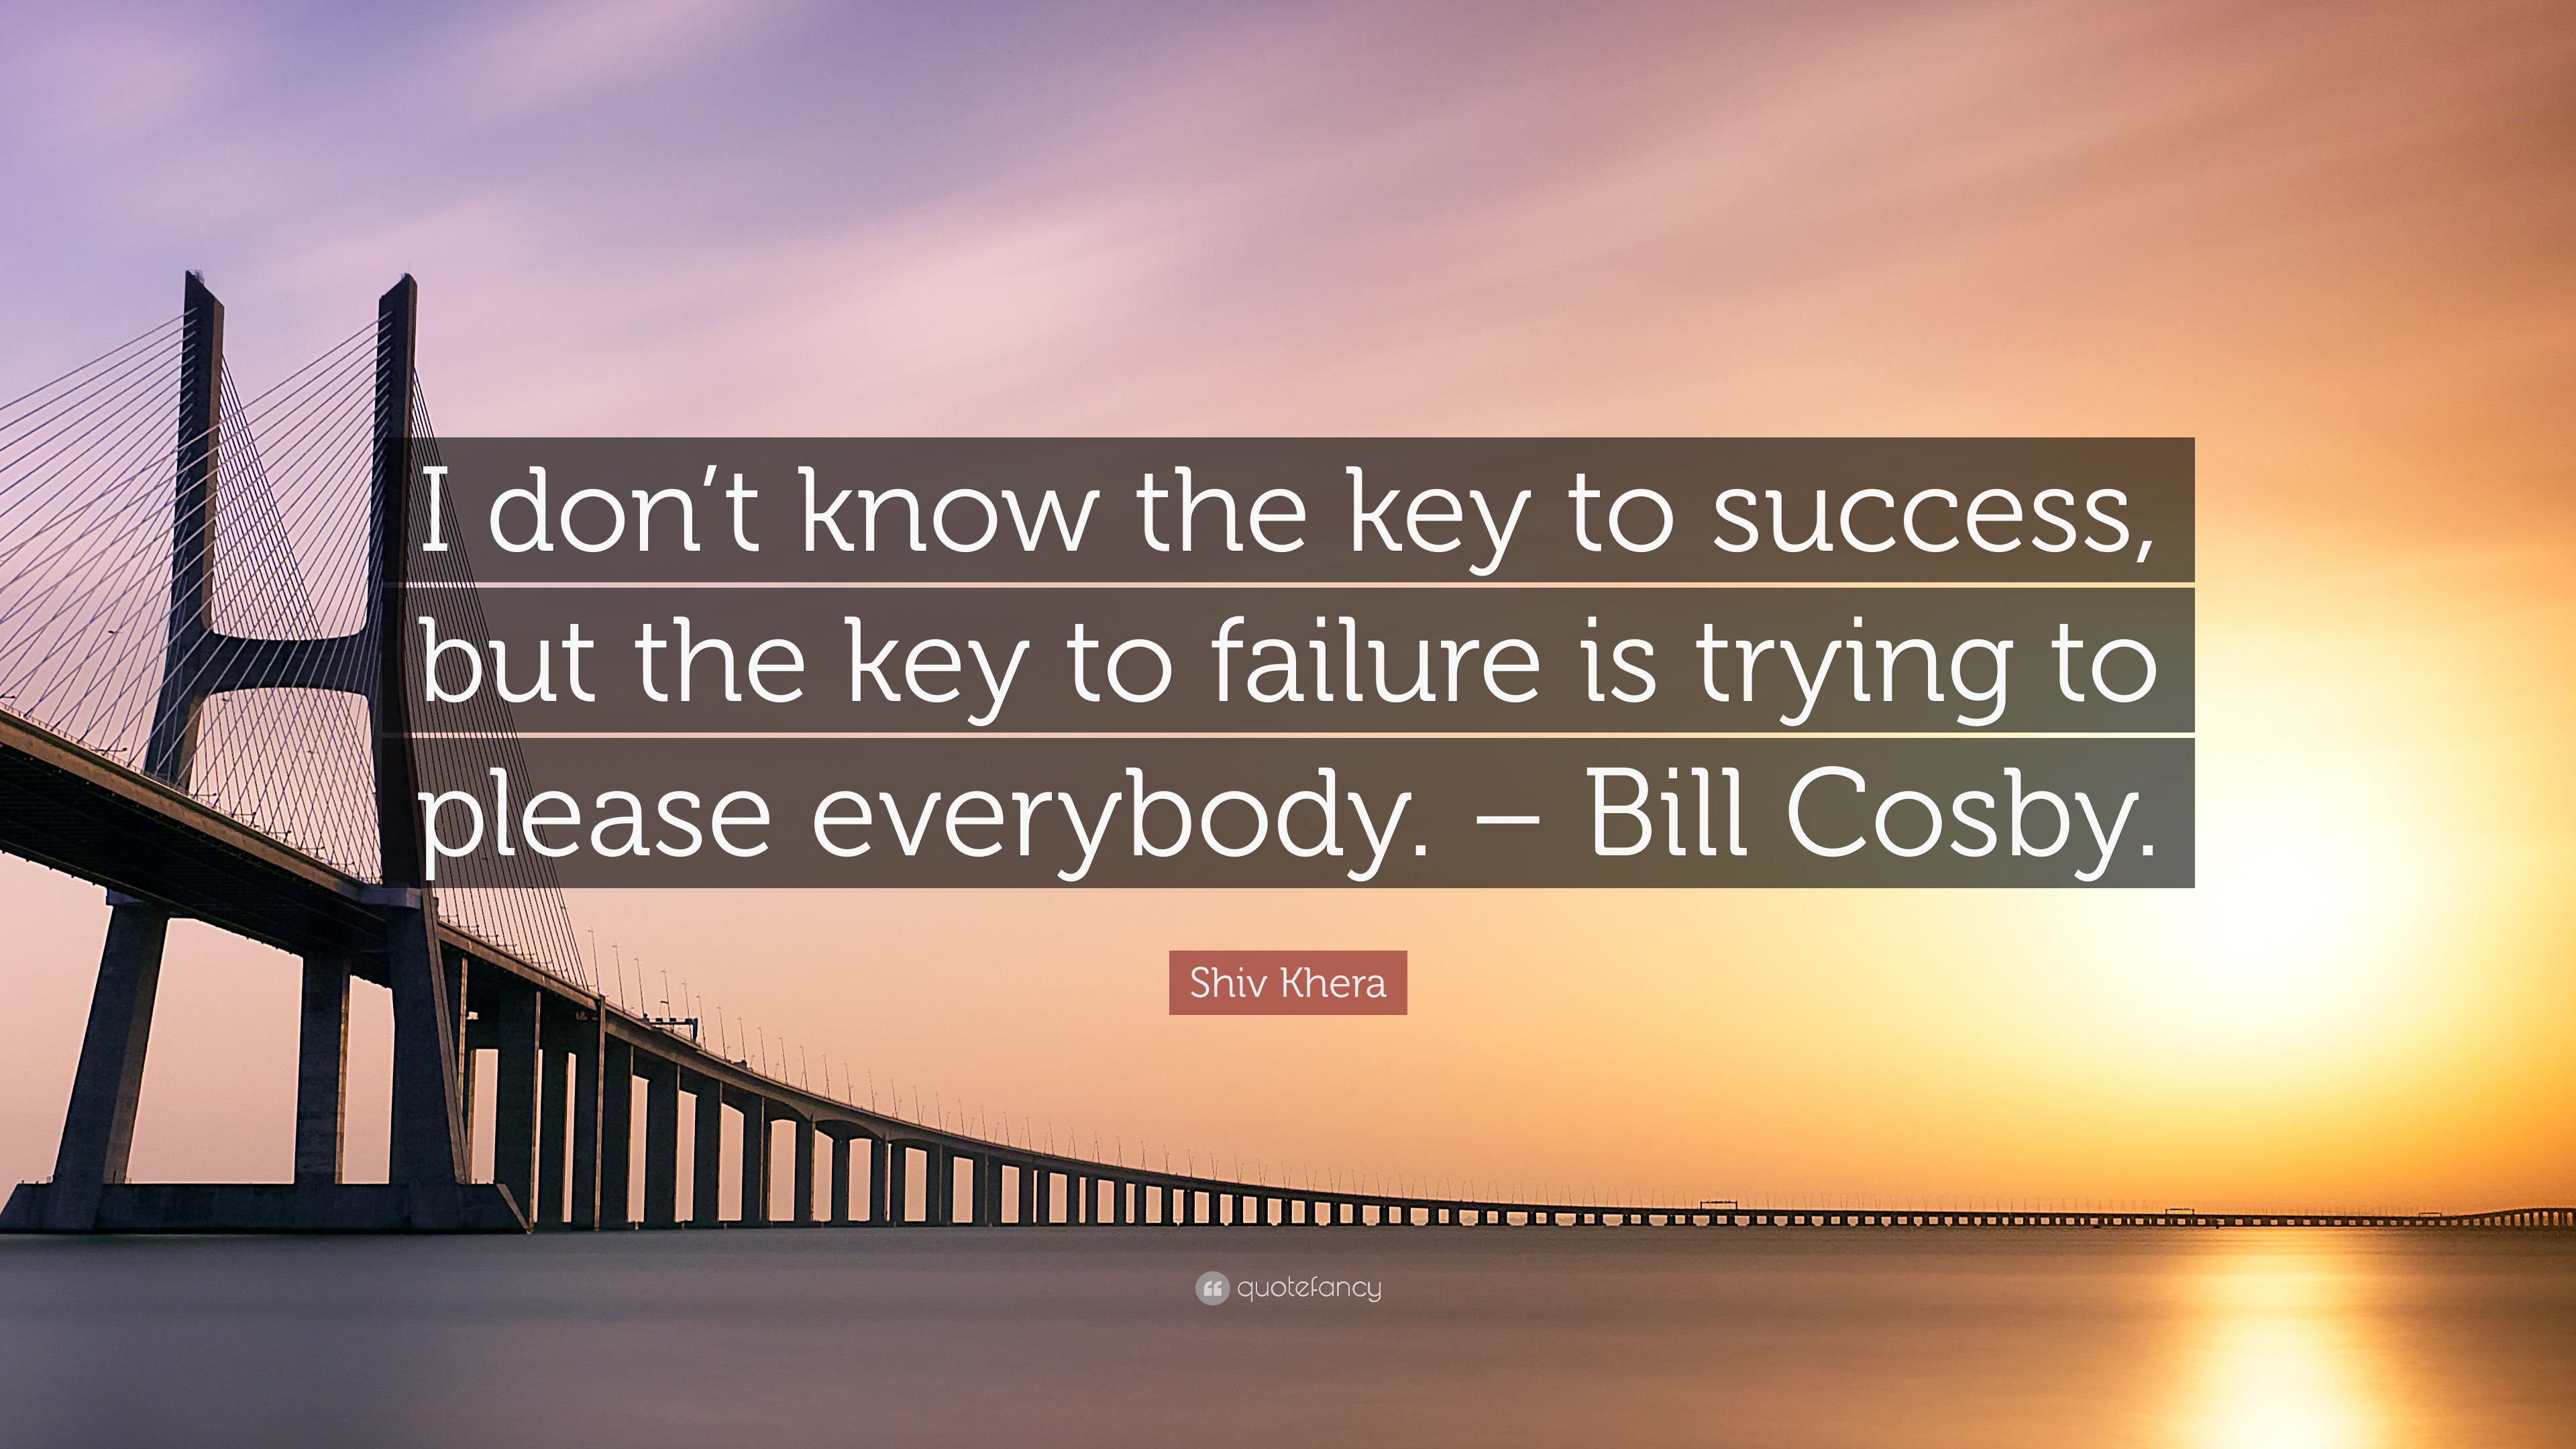 Daily Inspiration: The Key to Failure is Trying to Please